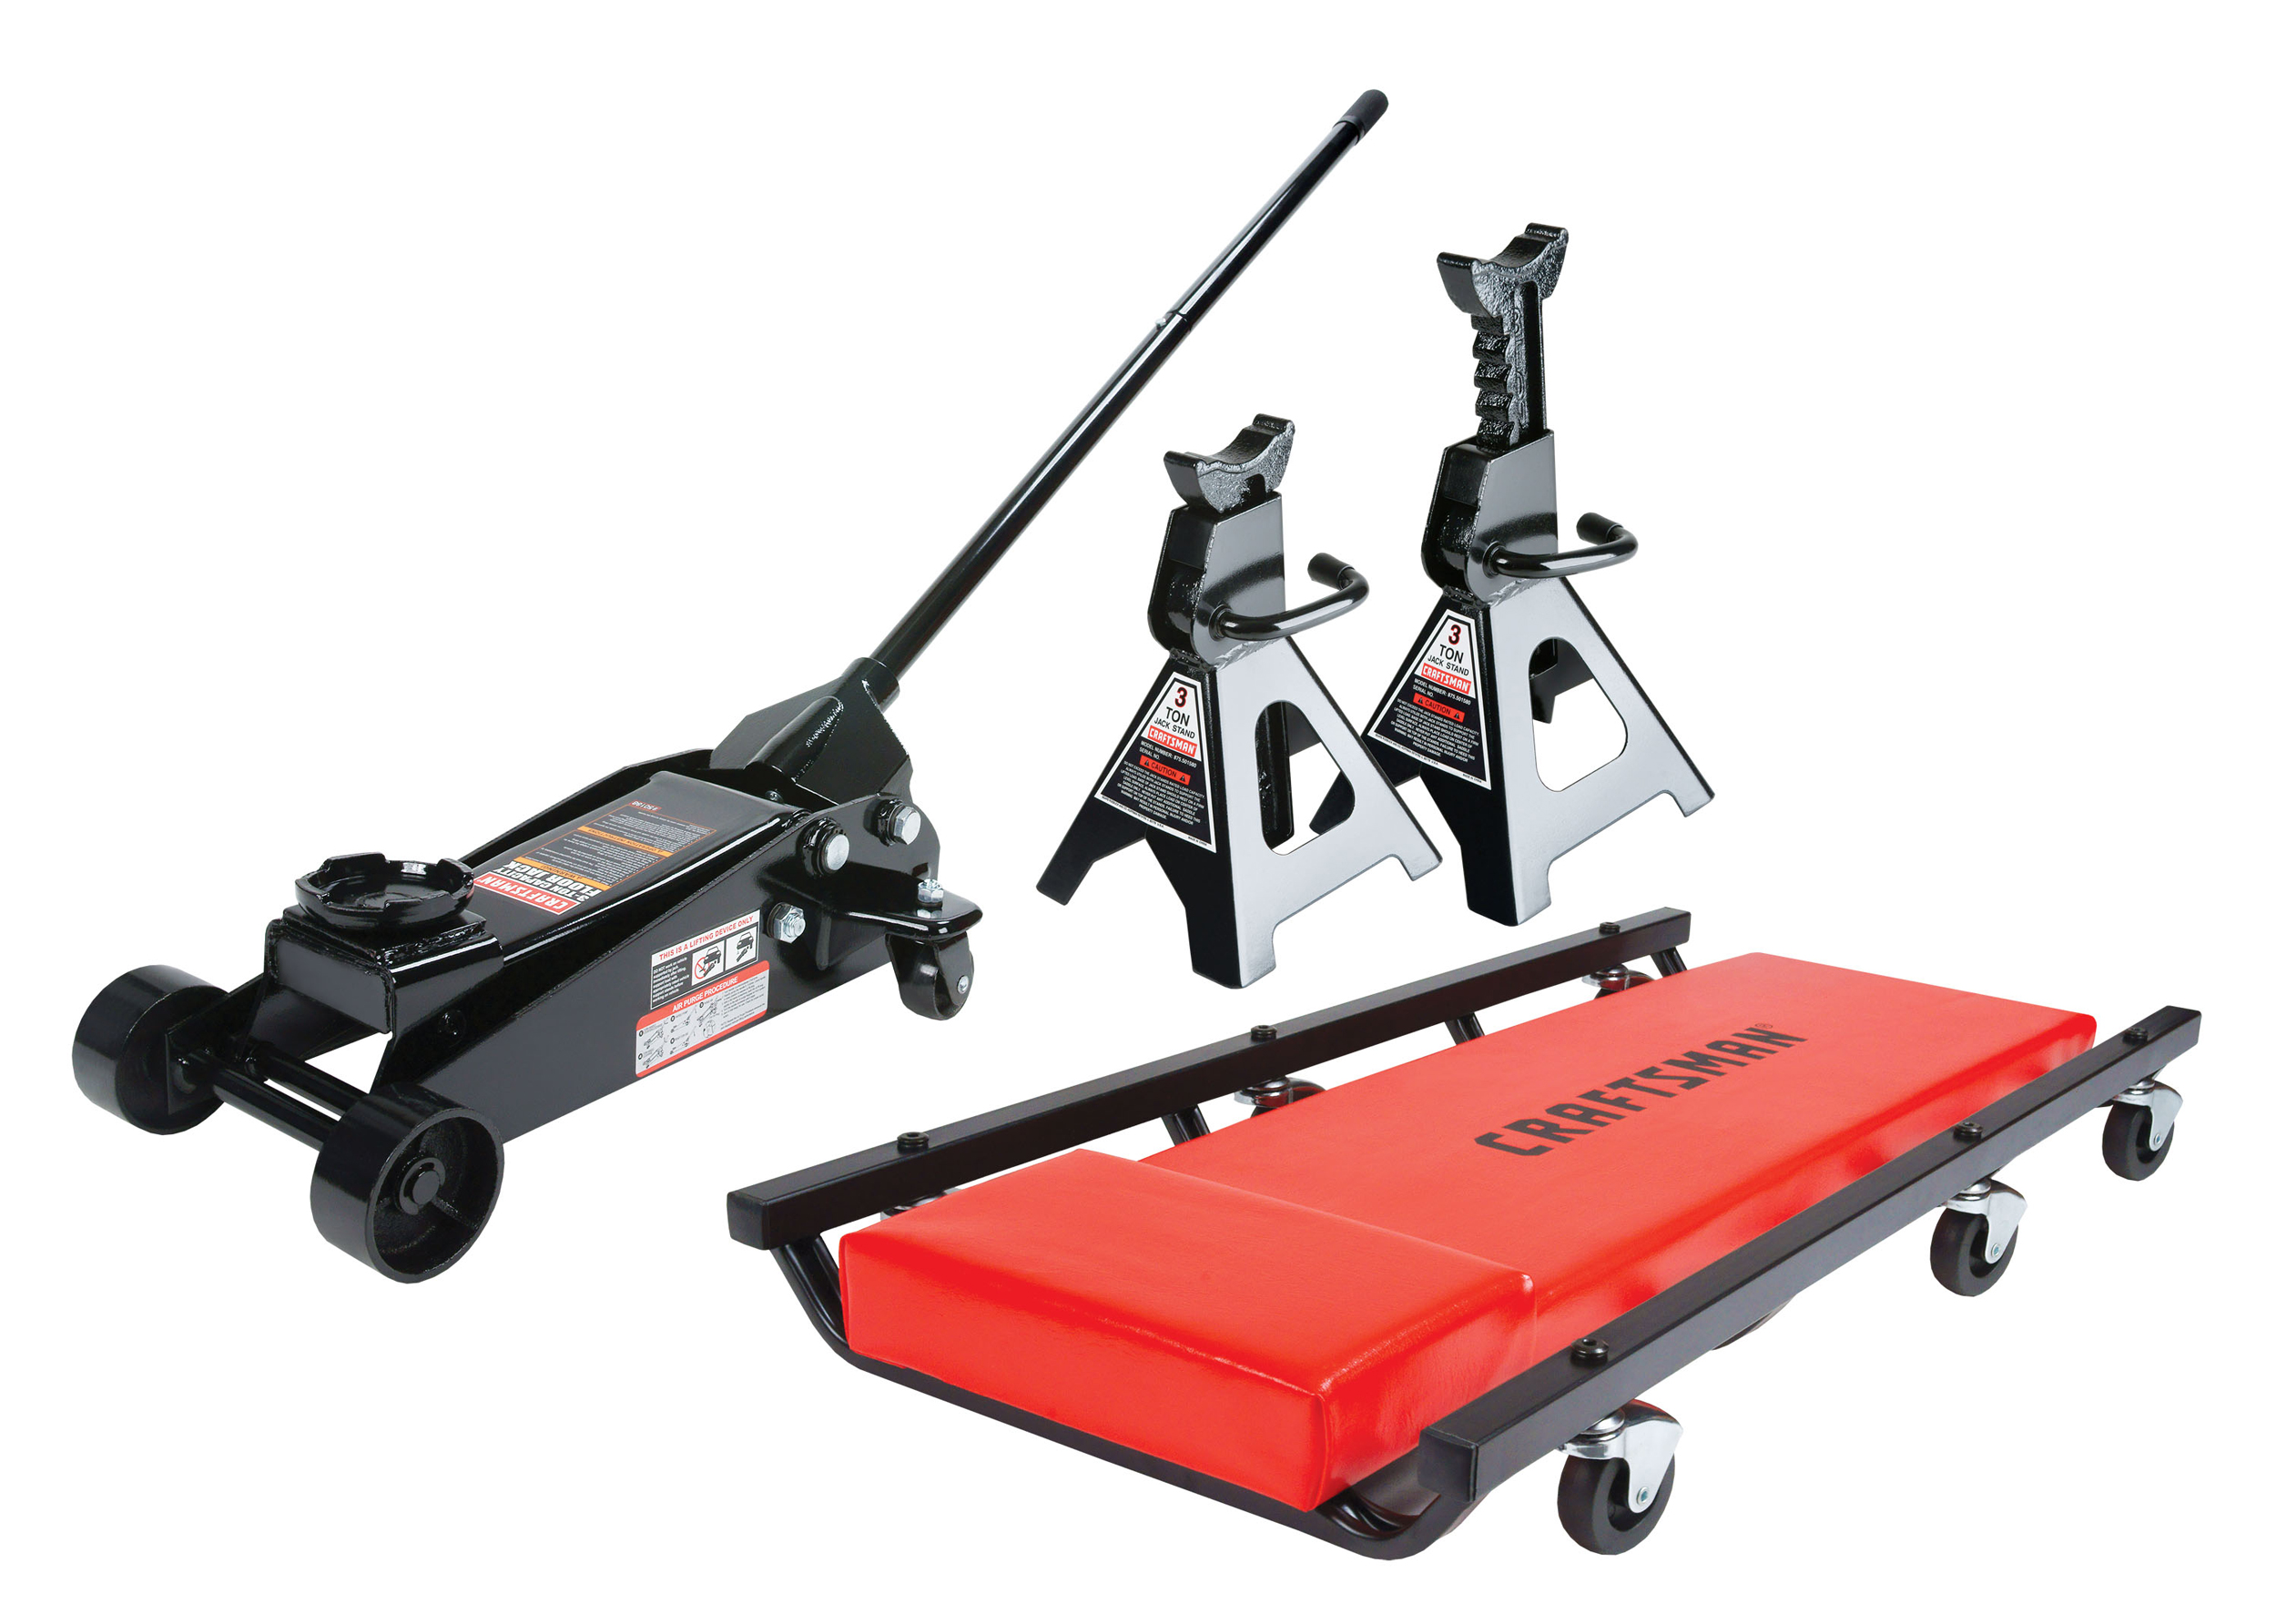 Craftsman 3 ton Floor Jack with Jack Stands and Creeper Set—$99.99!